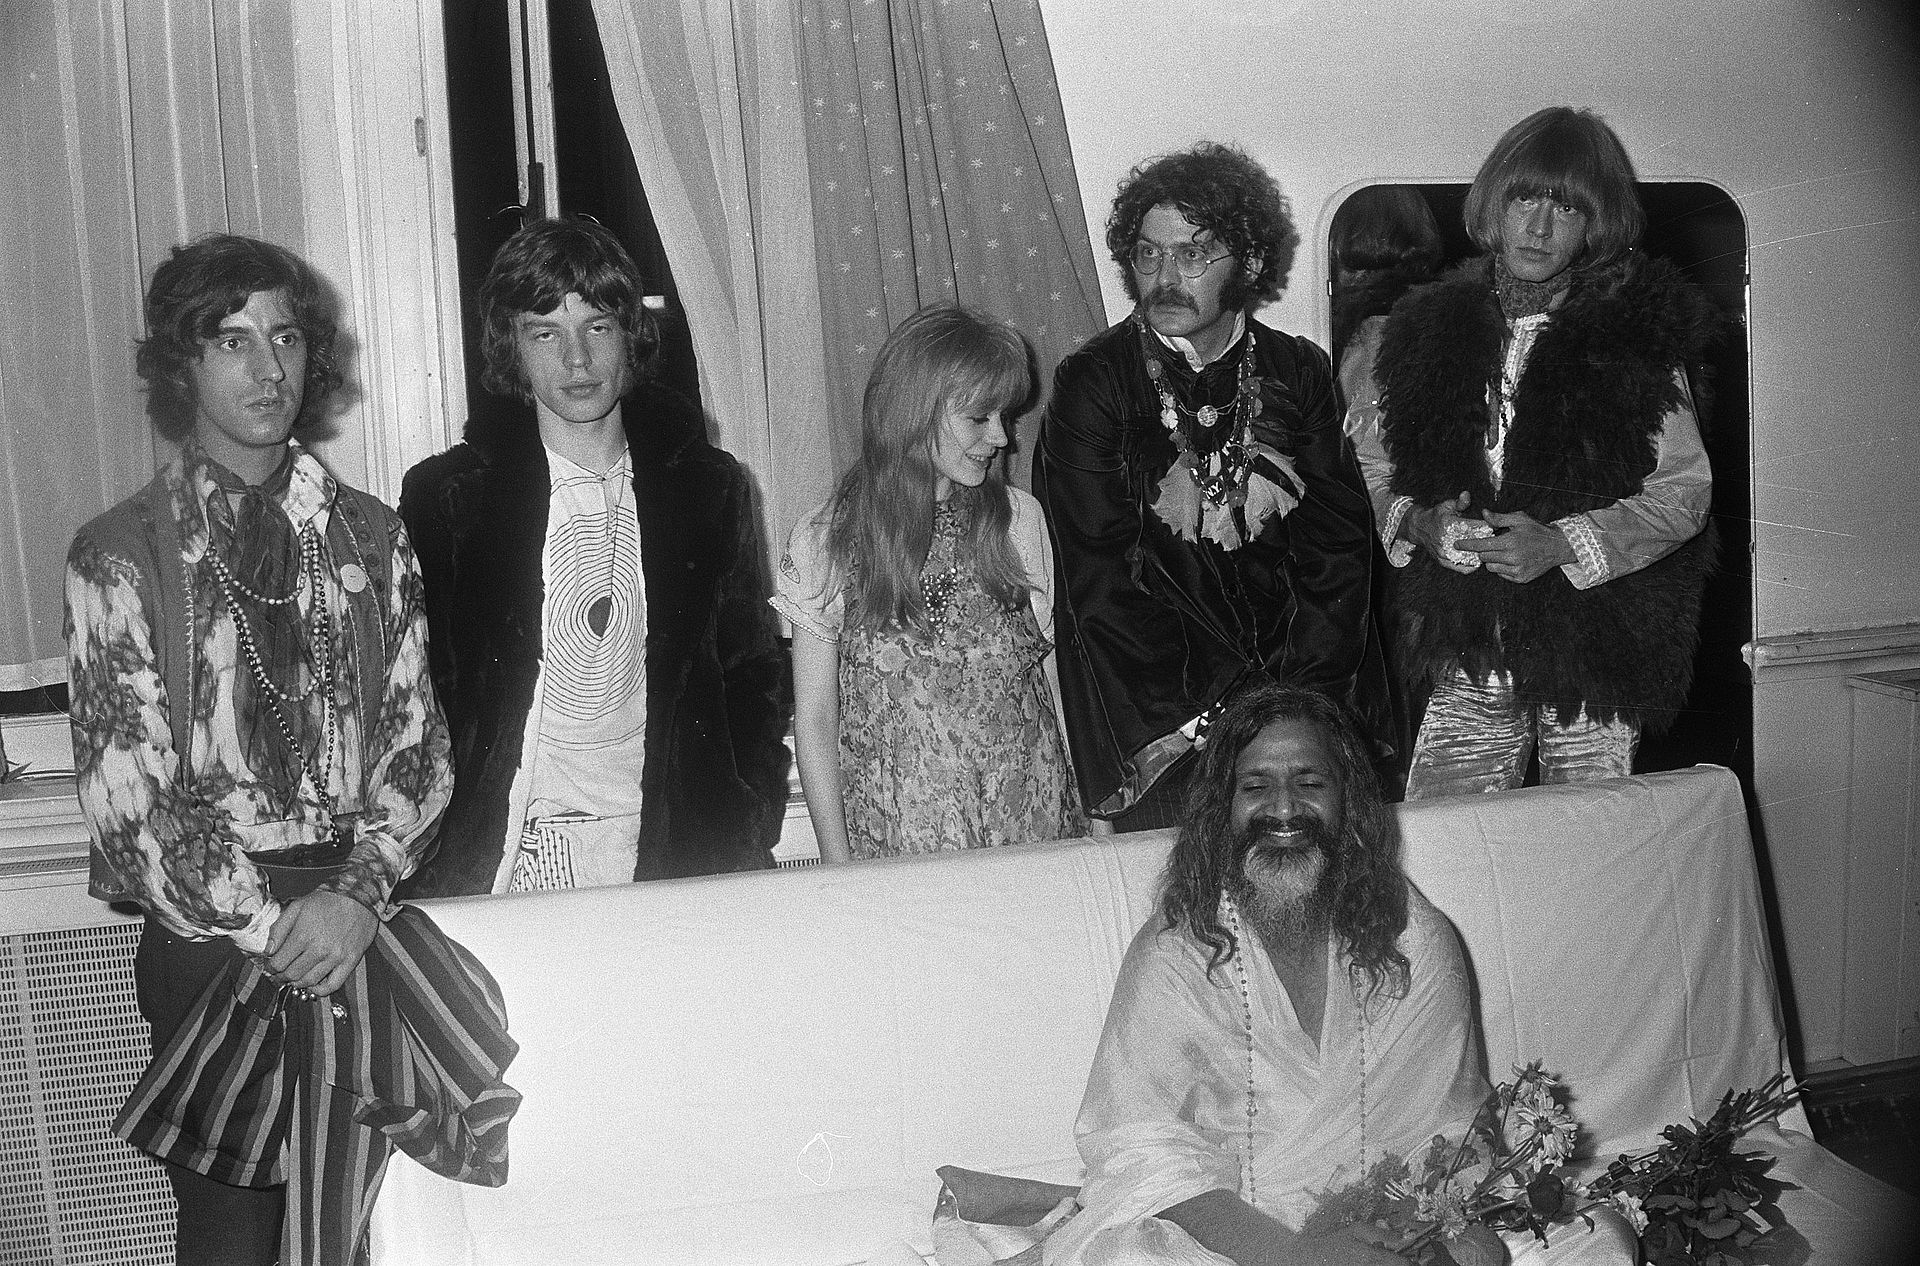 Photo of Mahesh yogi with famous people including mick jagger.